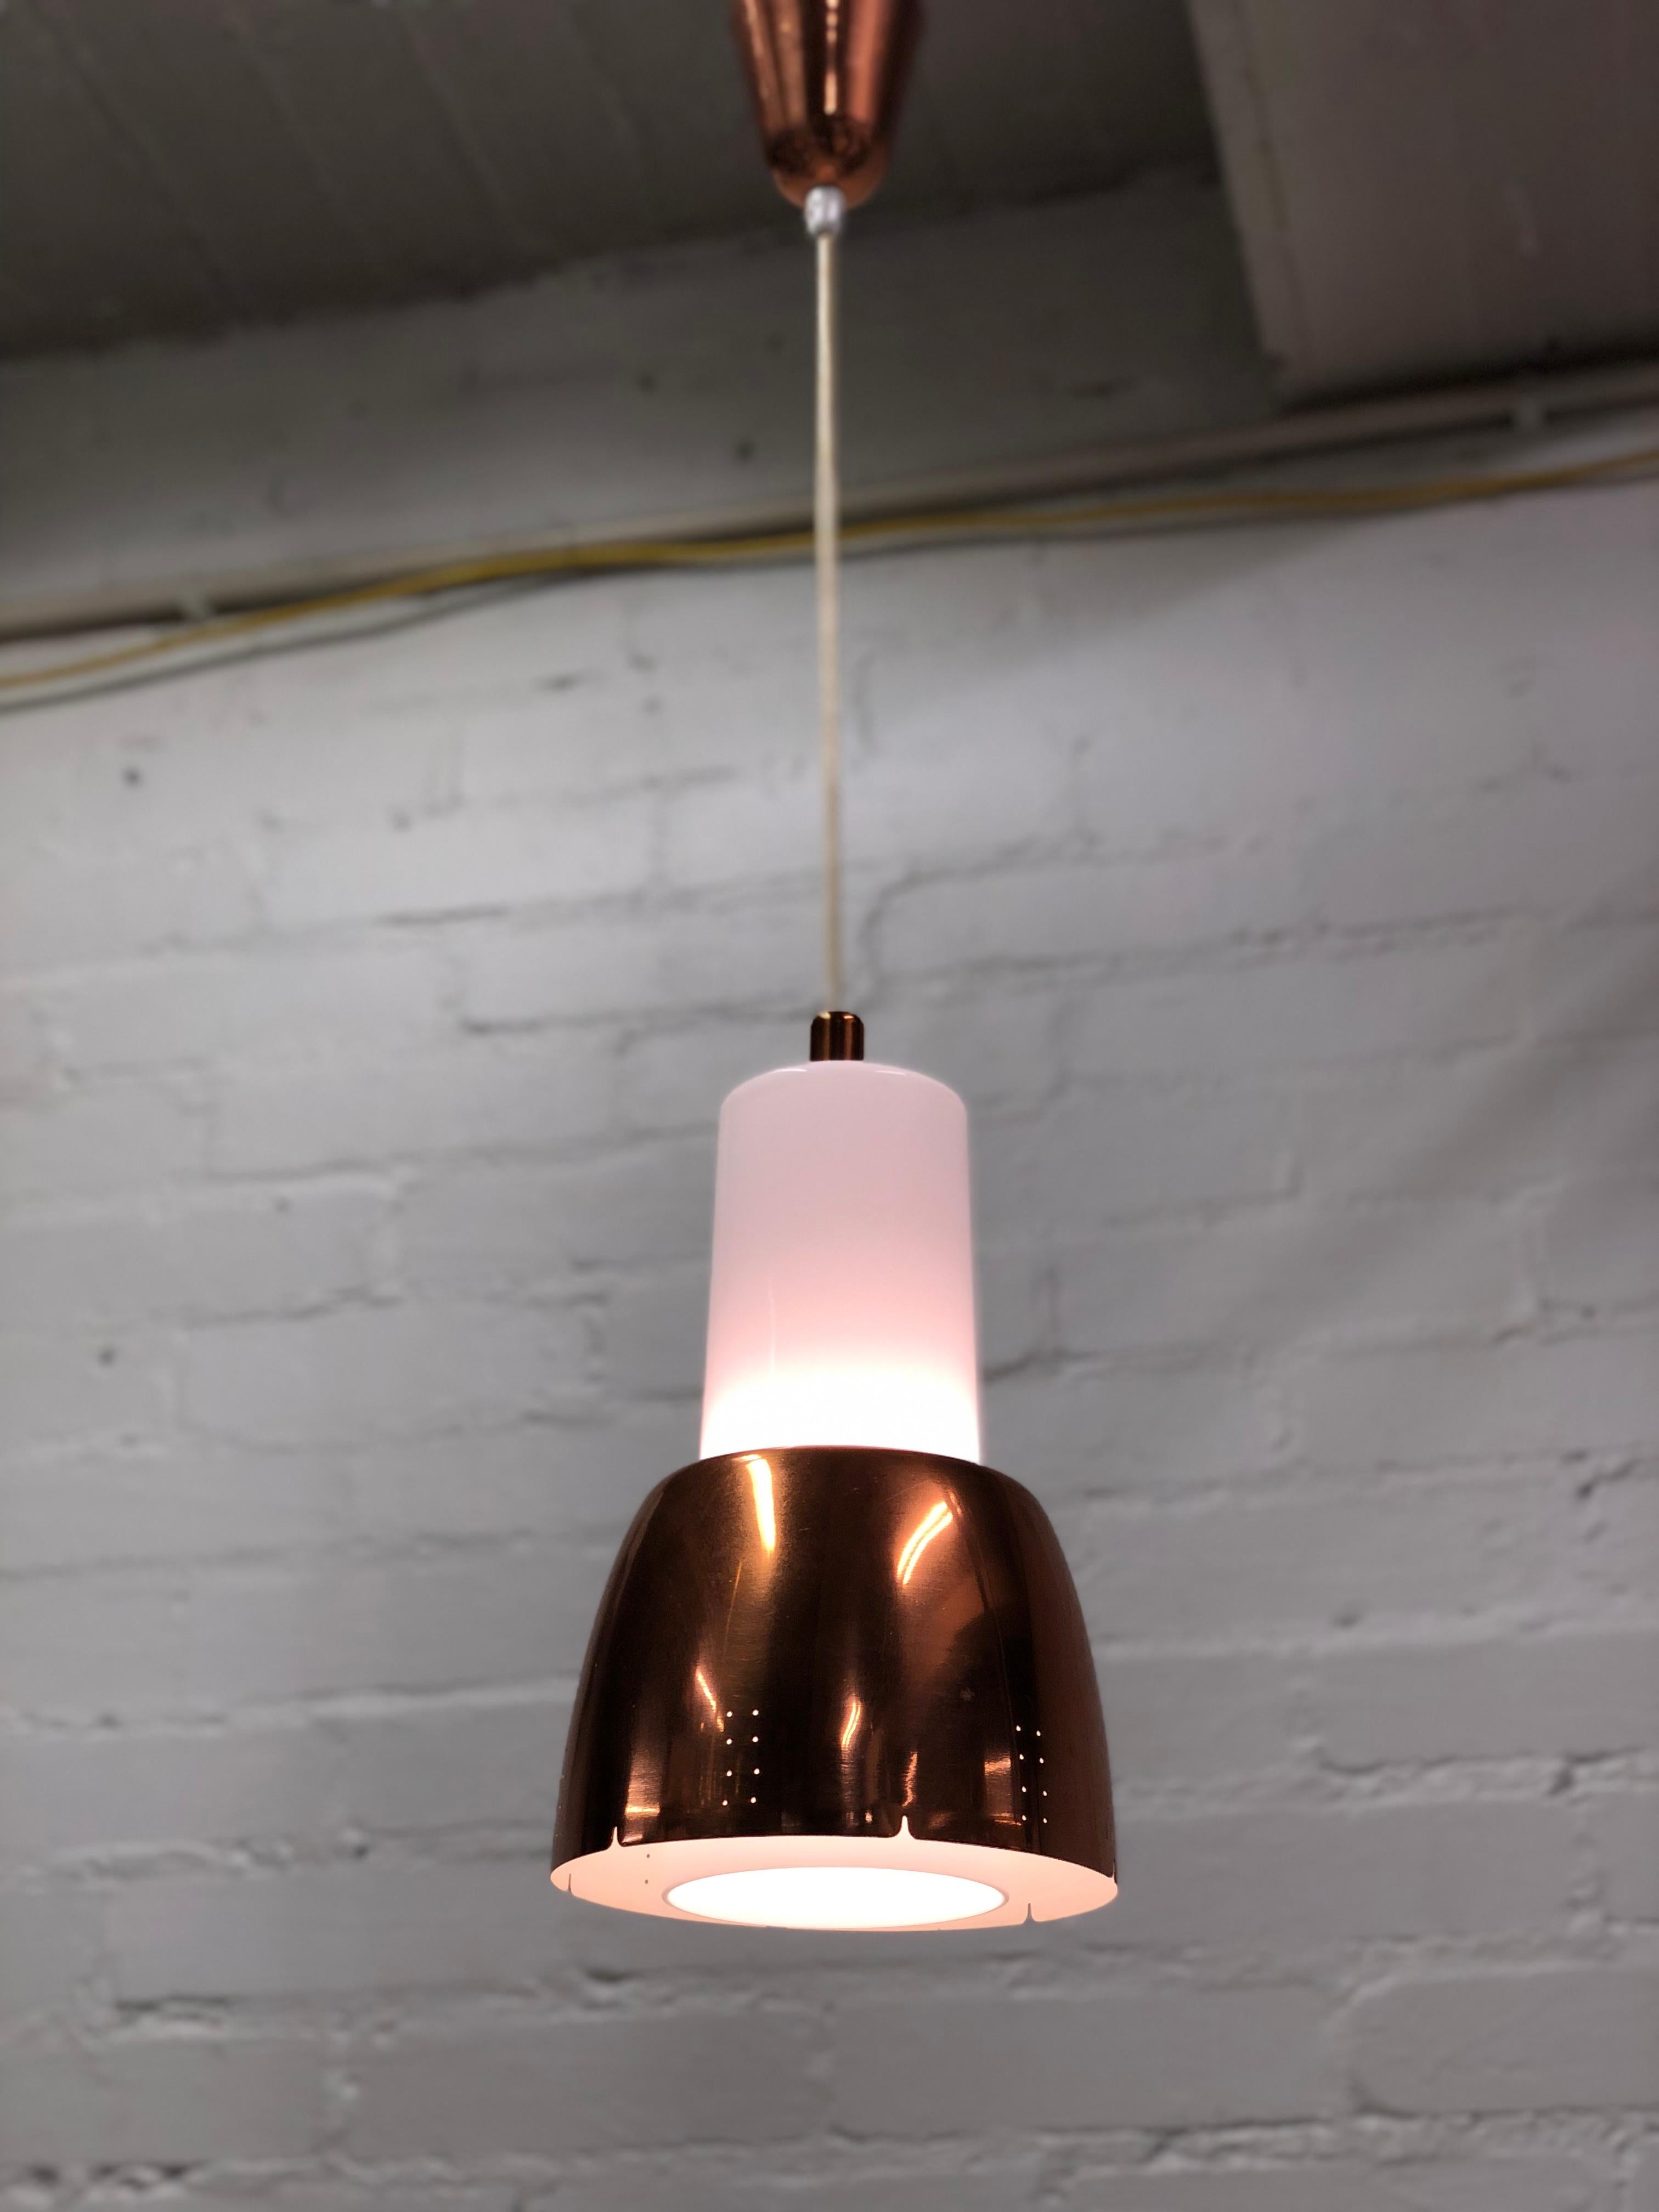 The place were we usually run into this model Tynell lamp is in the kitchen. 
Please note this is in copper and not brass, the metal most used by Tynell.  That adds a warm touch to it, especially in cold Finland 🙂.

We do run into different models